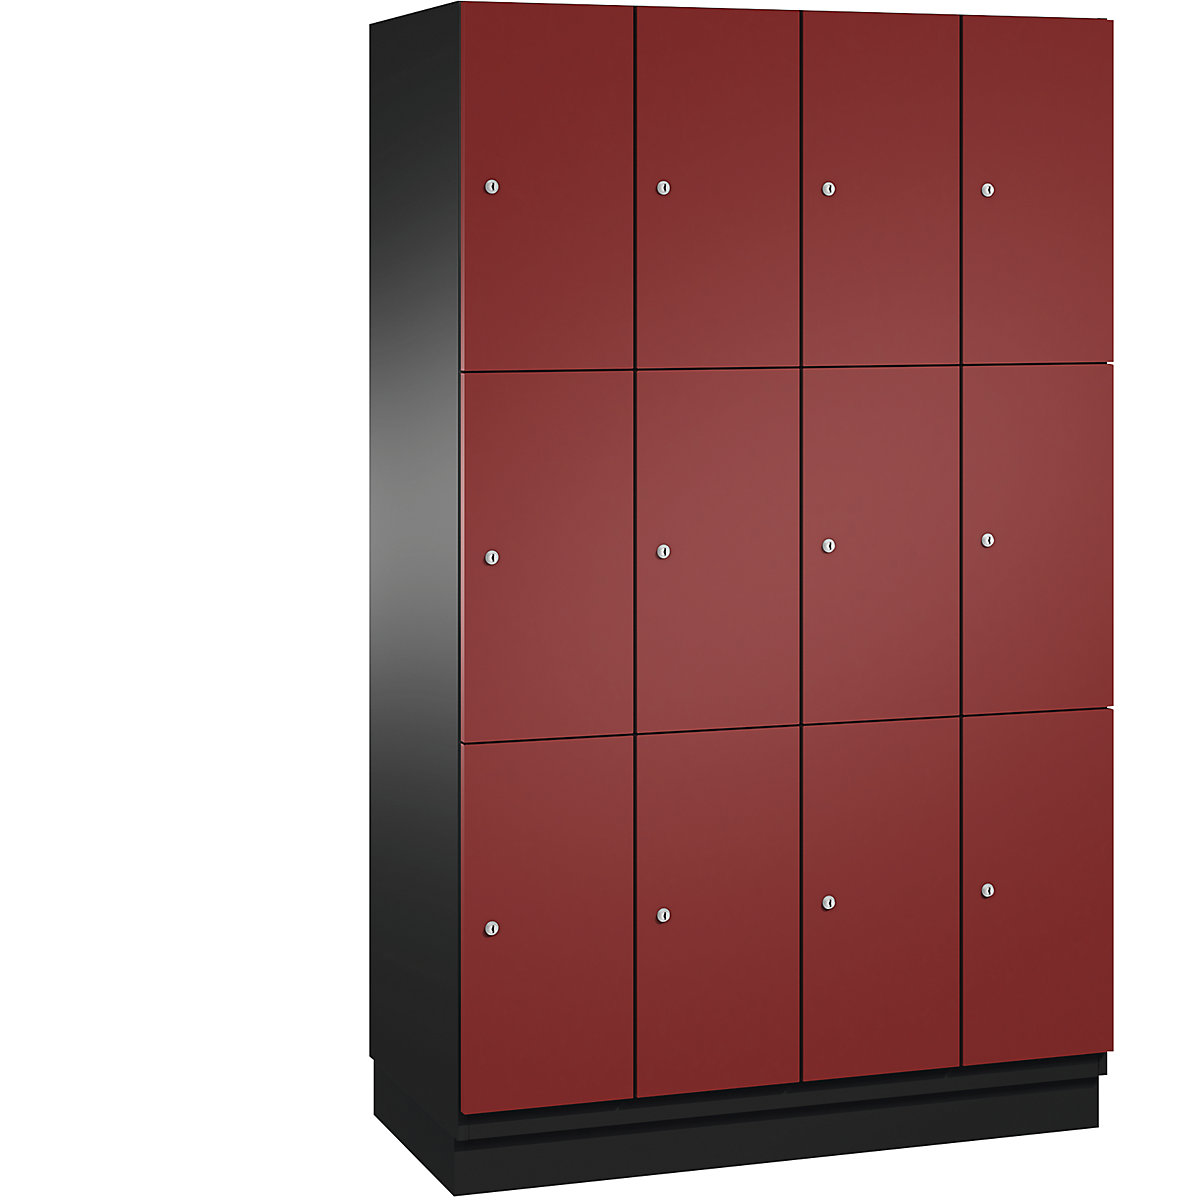 CAMBIO compartment locker with sheet steel doors – C+P, 12 compartments, width 1200 mm, body black grey / door ruby red, compartment height 616.6 mm-19